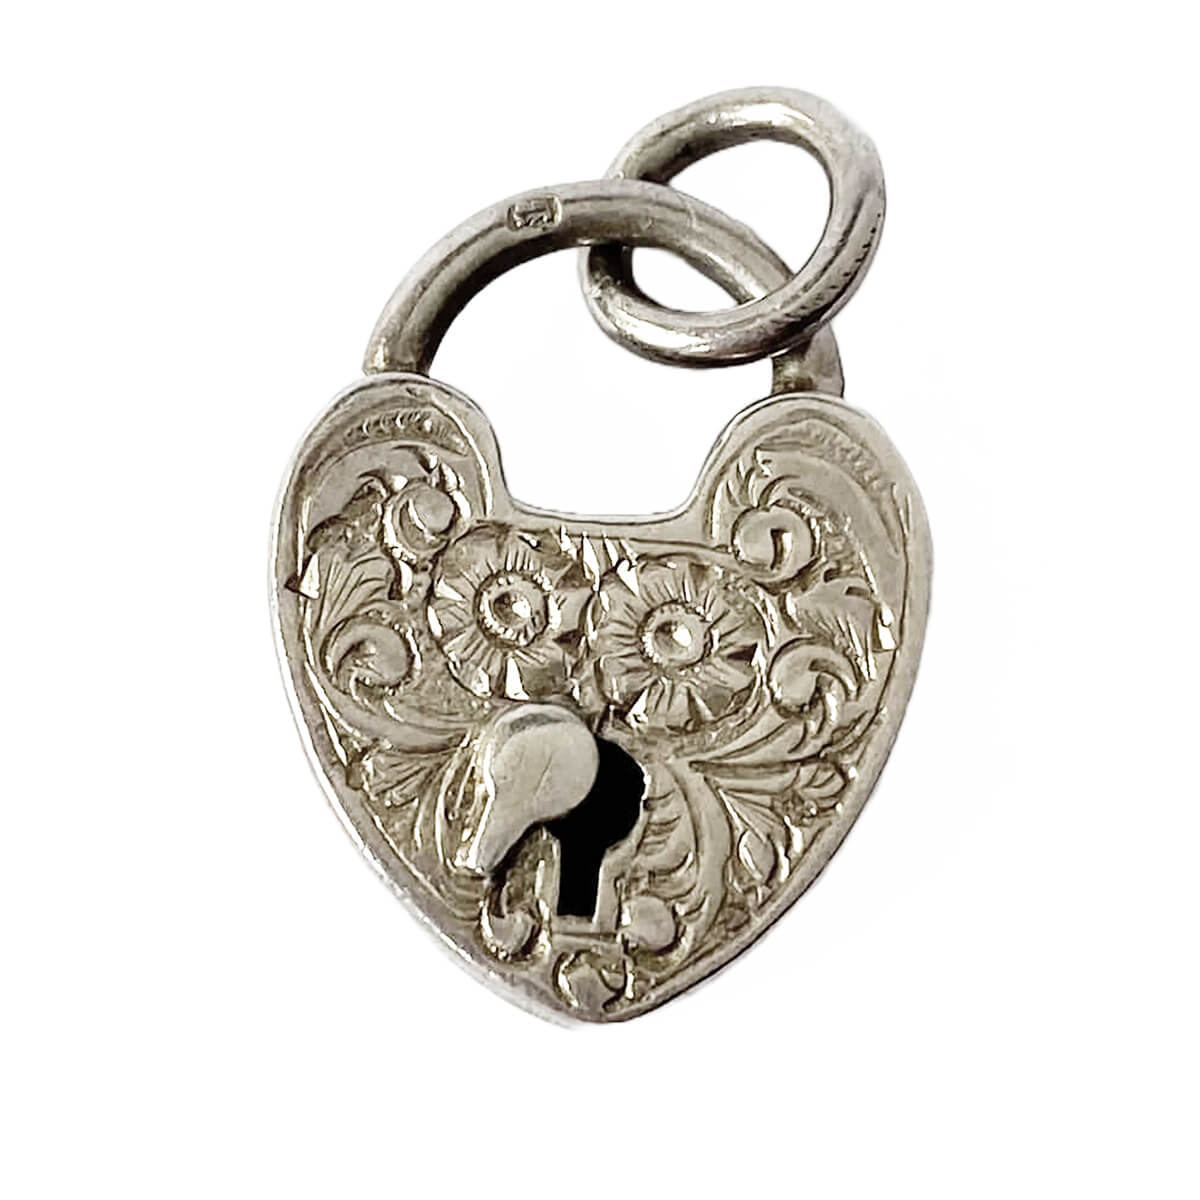 Antique Victorian padlock charm sterling silver pendant from Charmarama